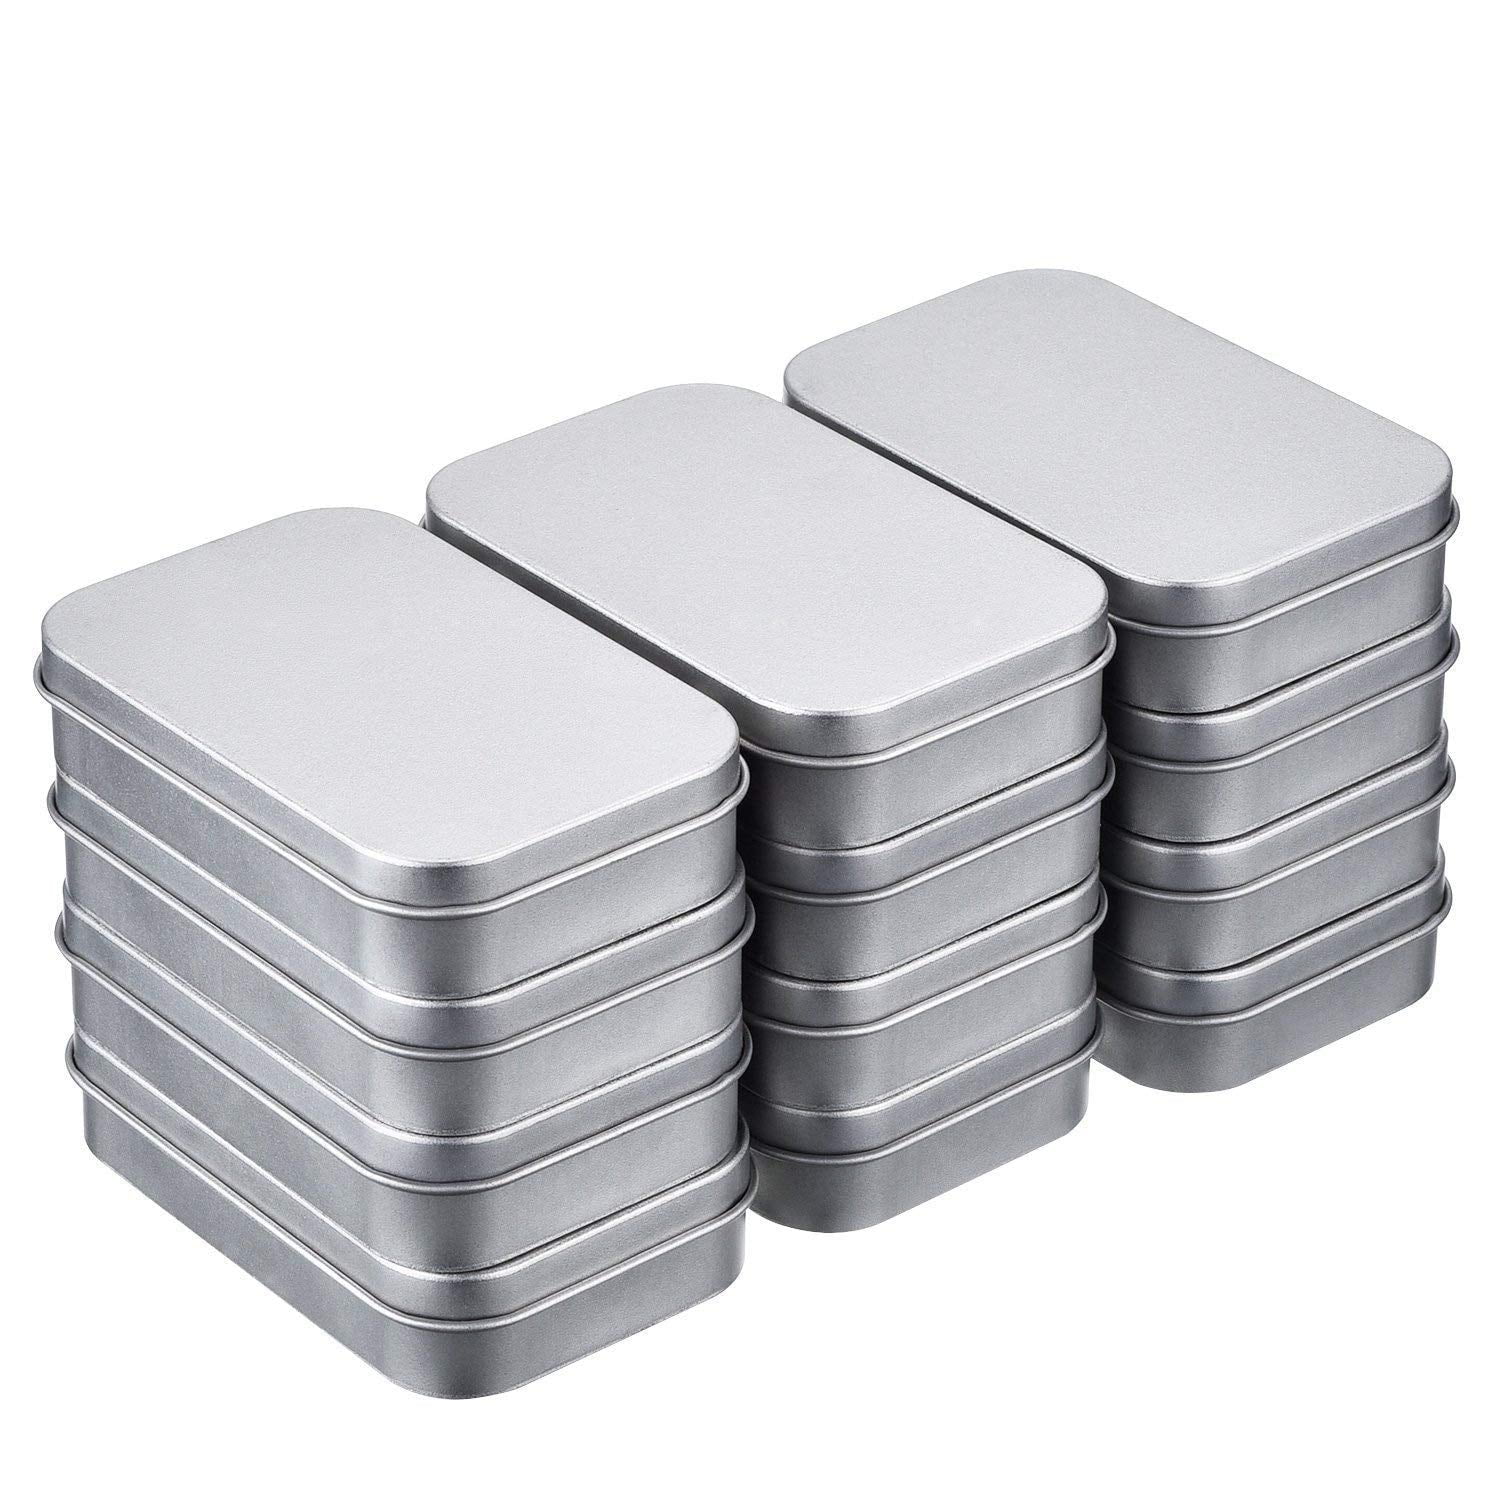 Aybloom Metal Rectangular Empty Hinged Tins 40 Pack Silver Mini Portable Box Containers Small Storage Kit & Home Organizer 